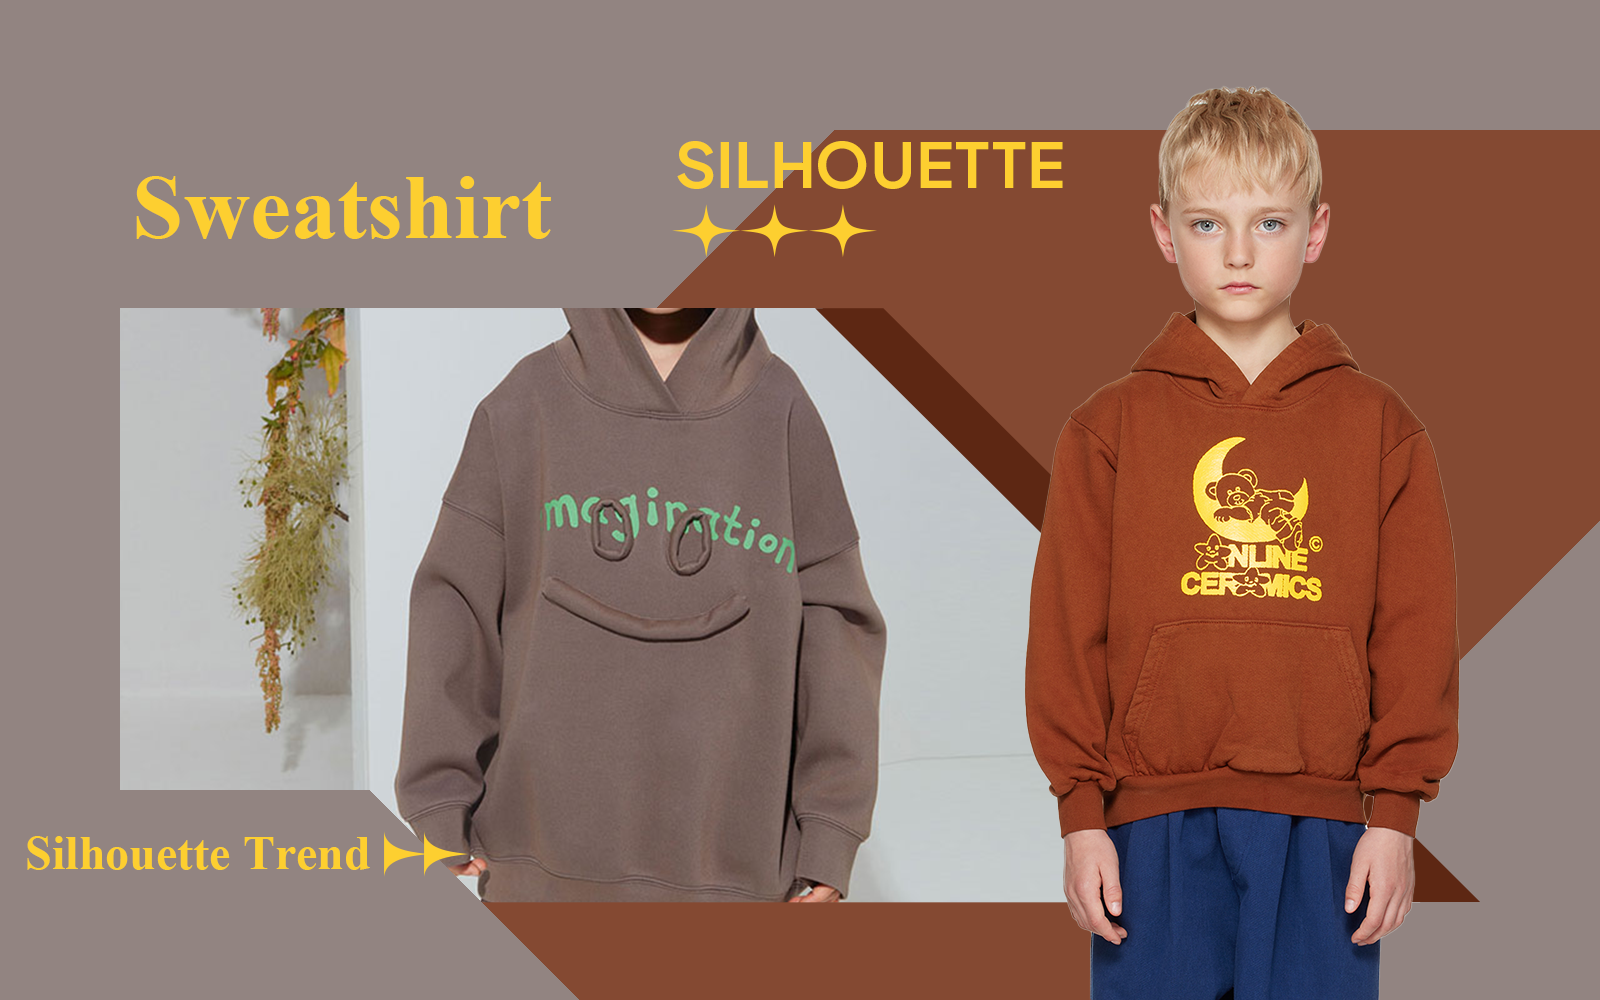 The Silhouette Trend for Boys' Sweatshirt